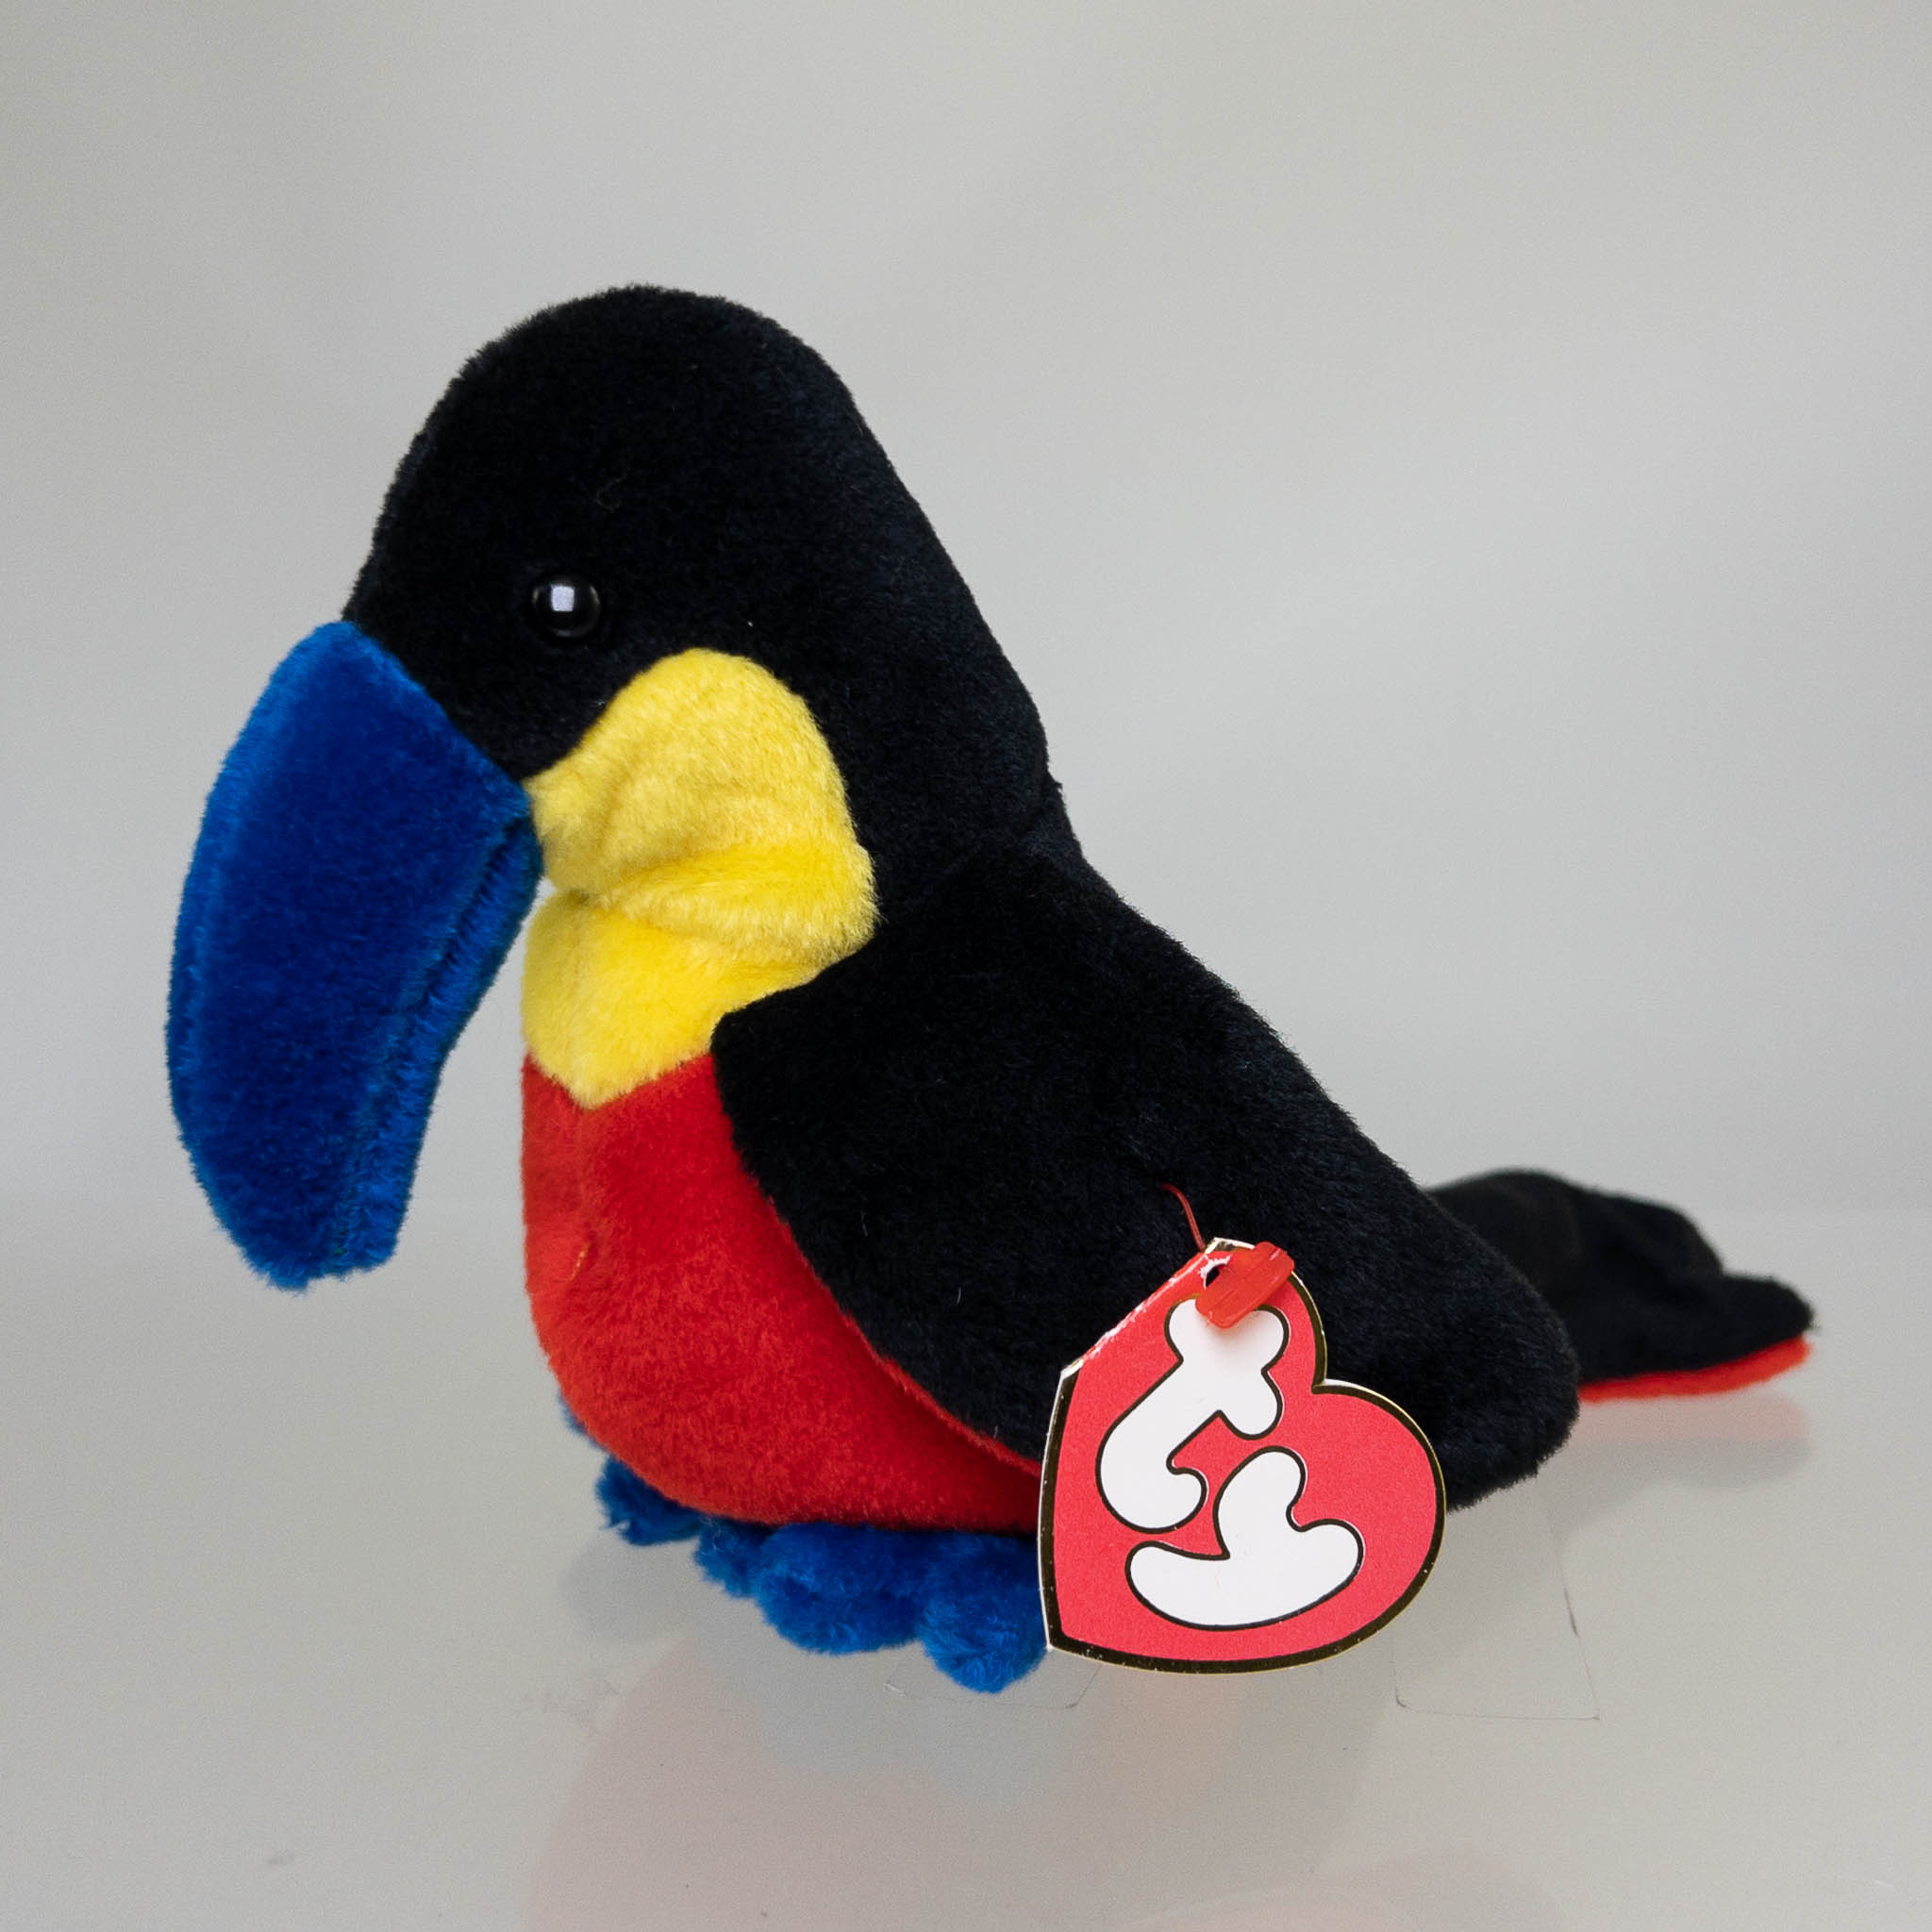 TY Beanie Baby - KIWI the Toucan (3rd Gen Hang Tag - MWNMTs)